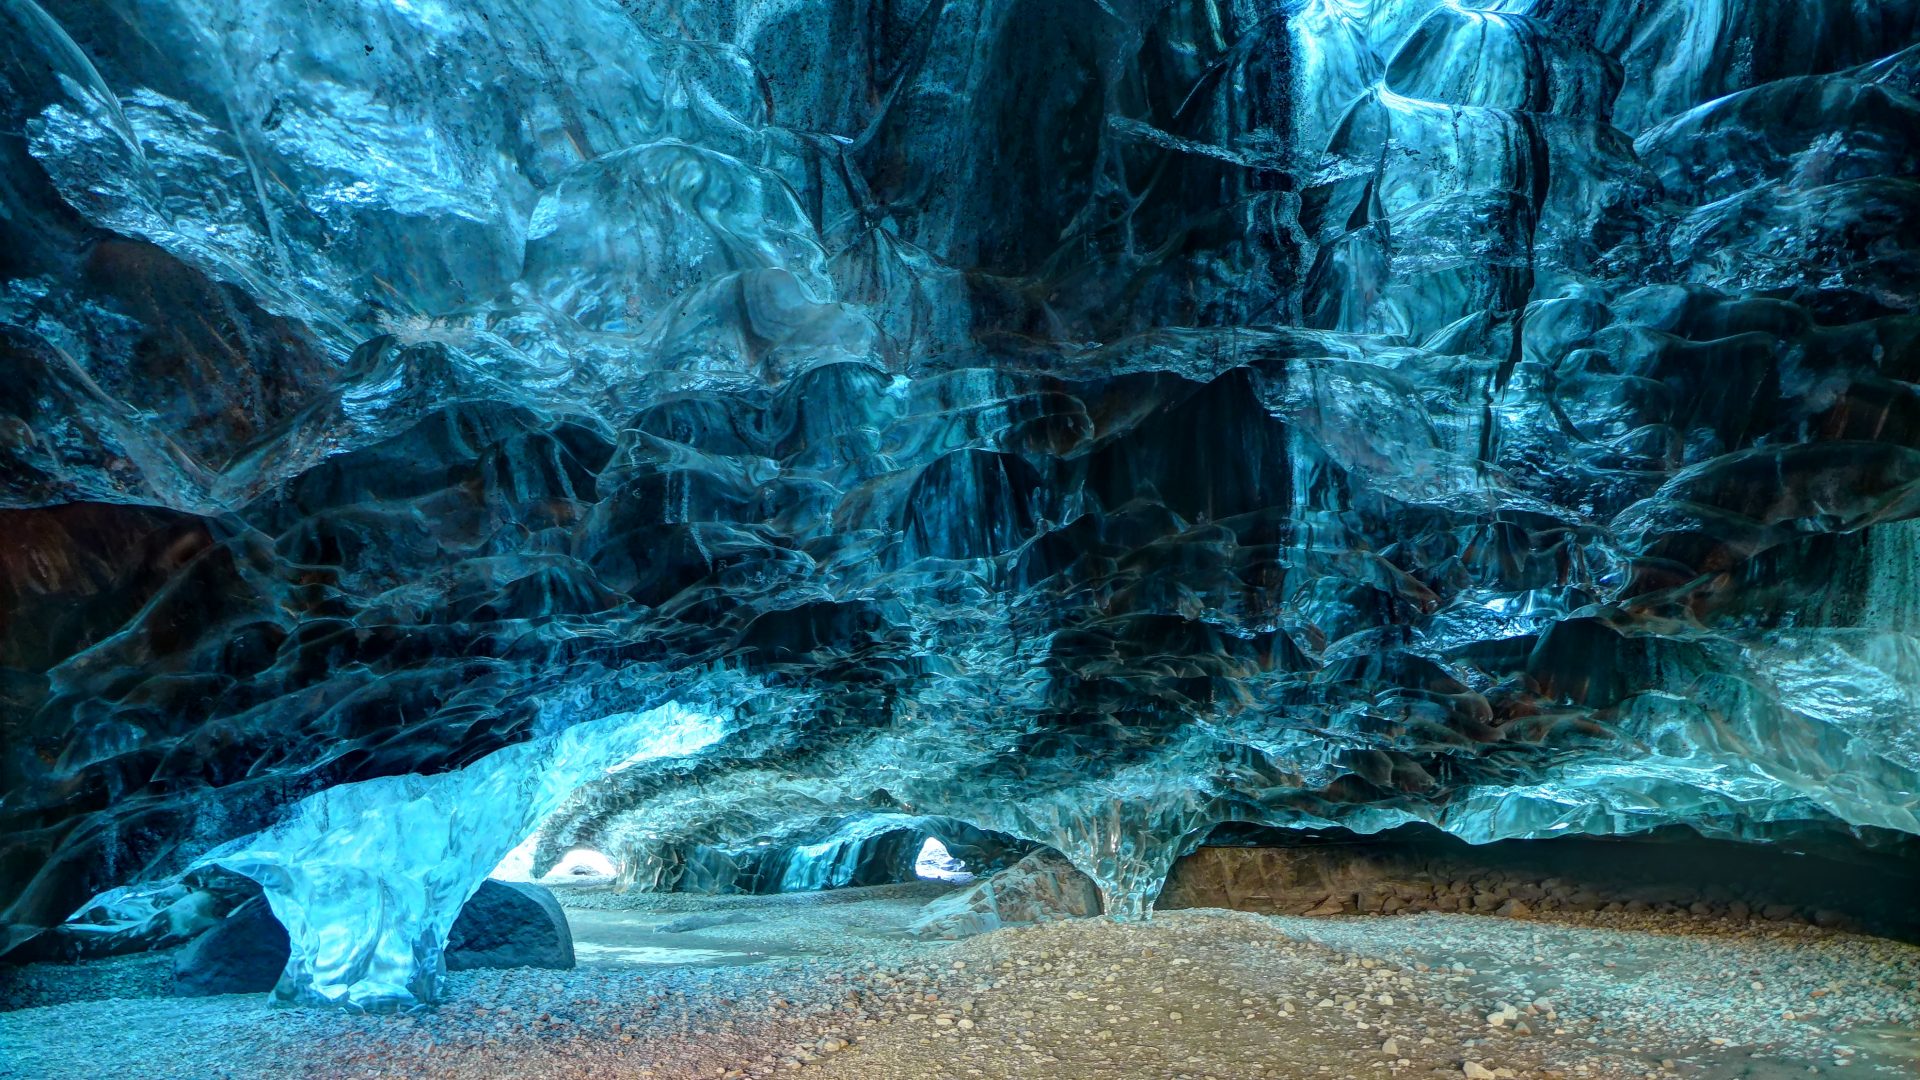 Nice Ice Cave Wallpapers, Ice Cave Island, 3961x2225, #11545